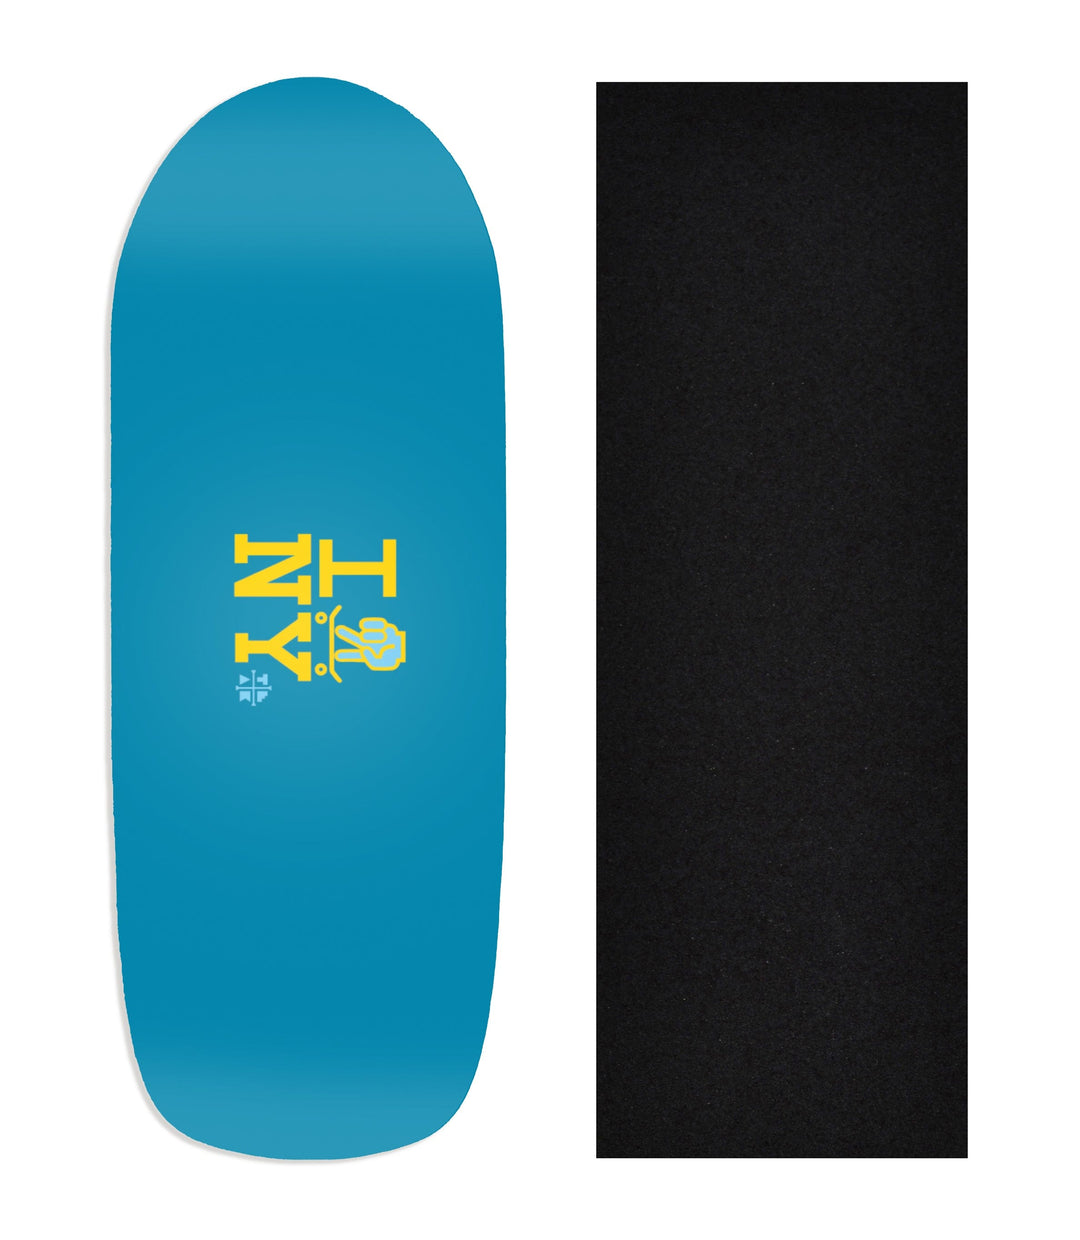 Teak Tuning Heat Transfer Graphic Wooden Fingerboard Deck, "I Skate NY" (Blue) Poolparty Deck